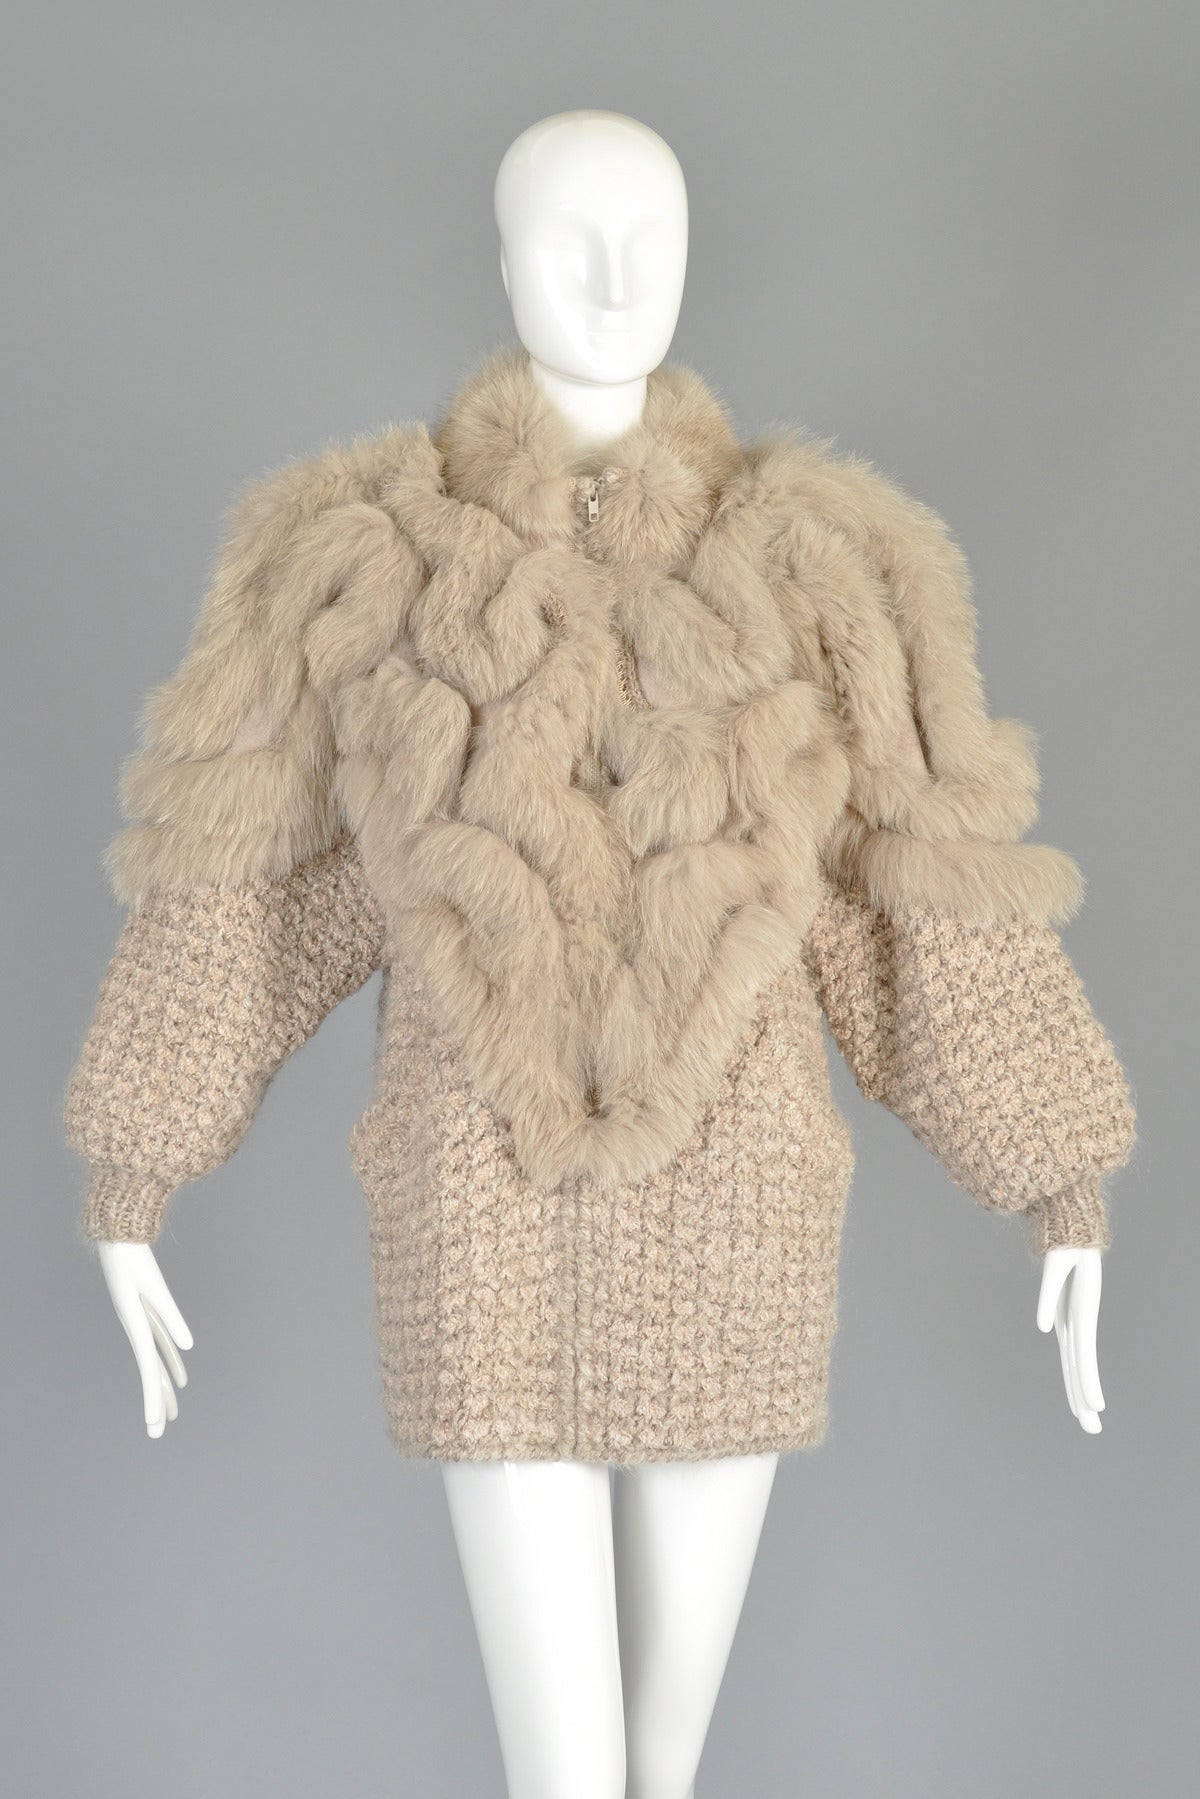 Superb 1980s avant garde knit cocoon coat with fox fur shoulders. Delicious pale cappuccino color. Ultra heavy mohair/wool/acrylic blend knit body with zip front and besom pockets. Genuine suede panels surround the shoulders, front and back and are